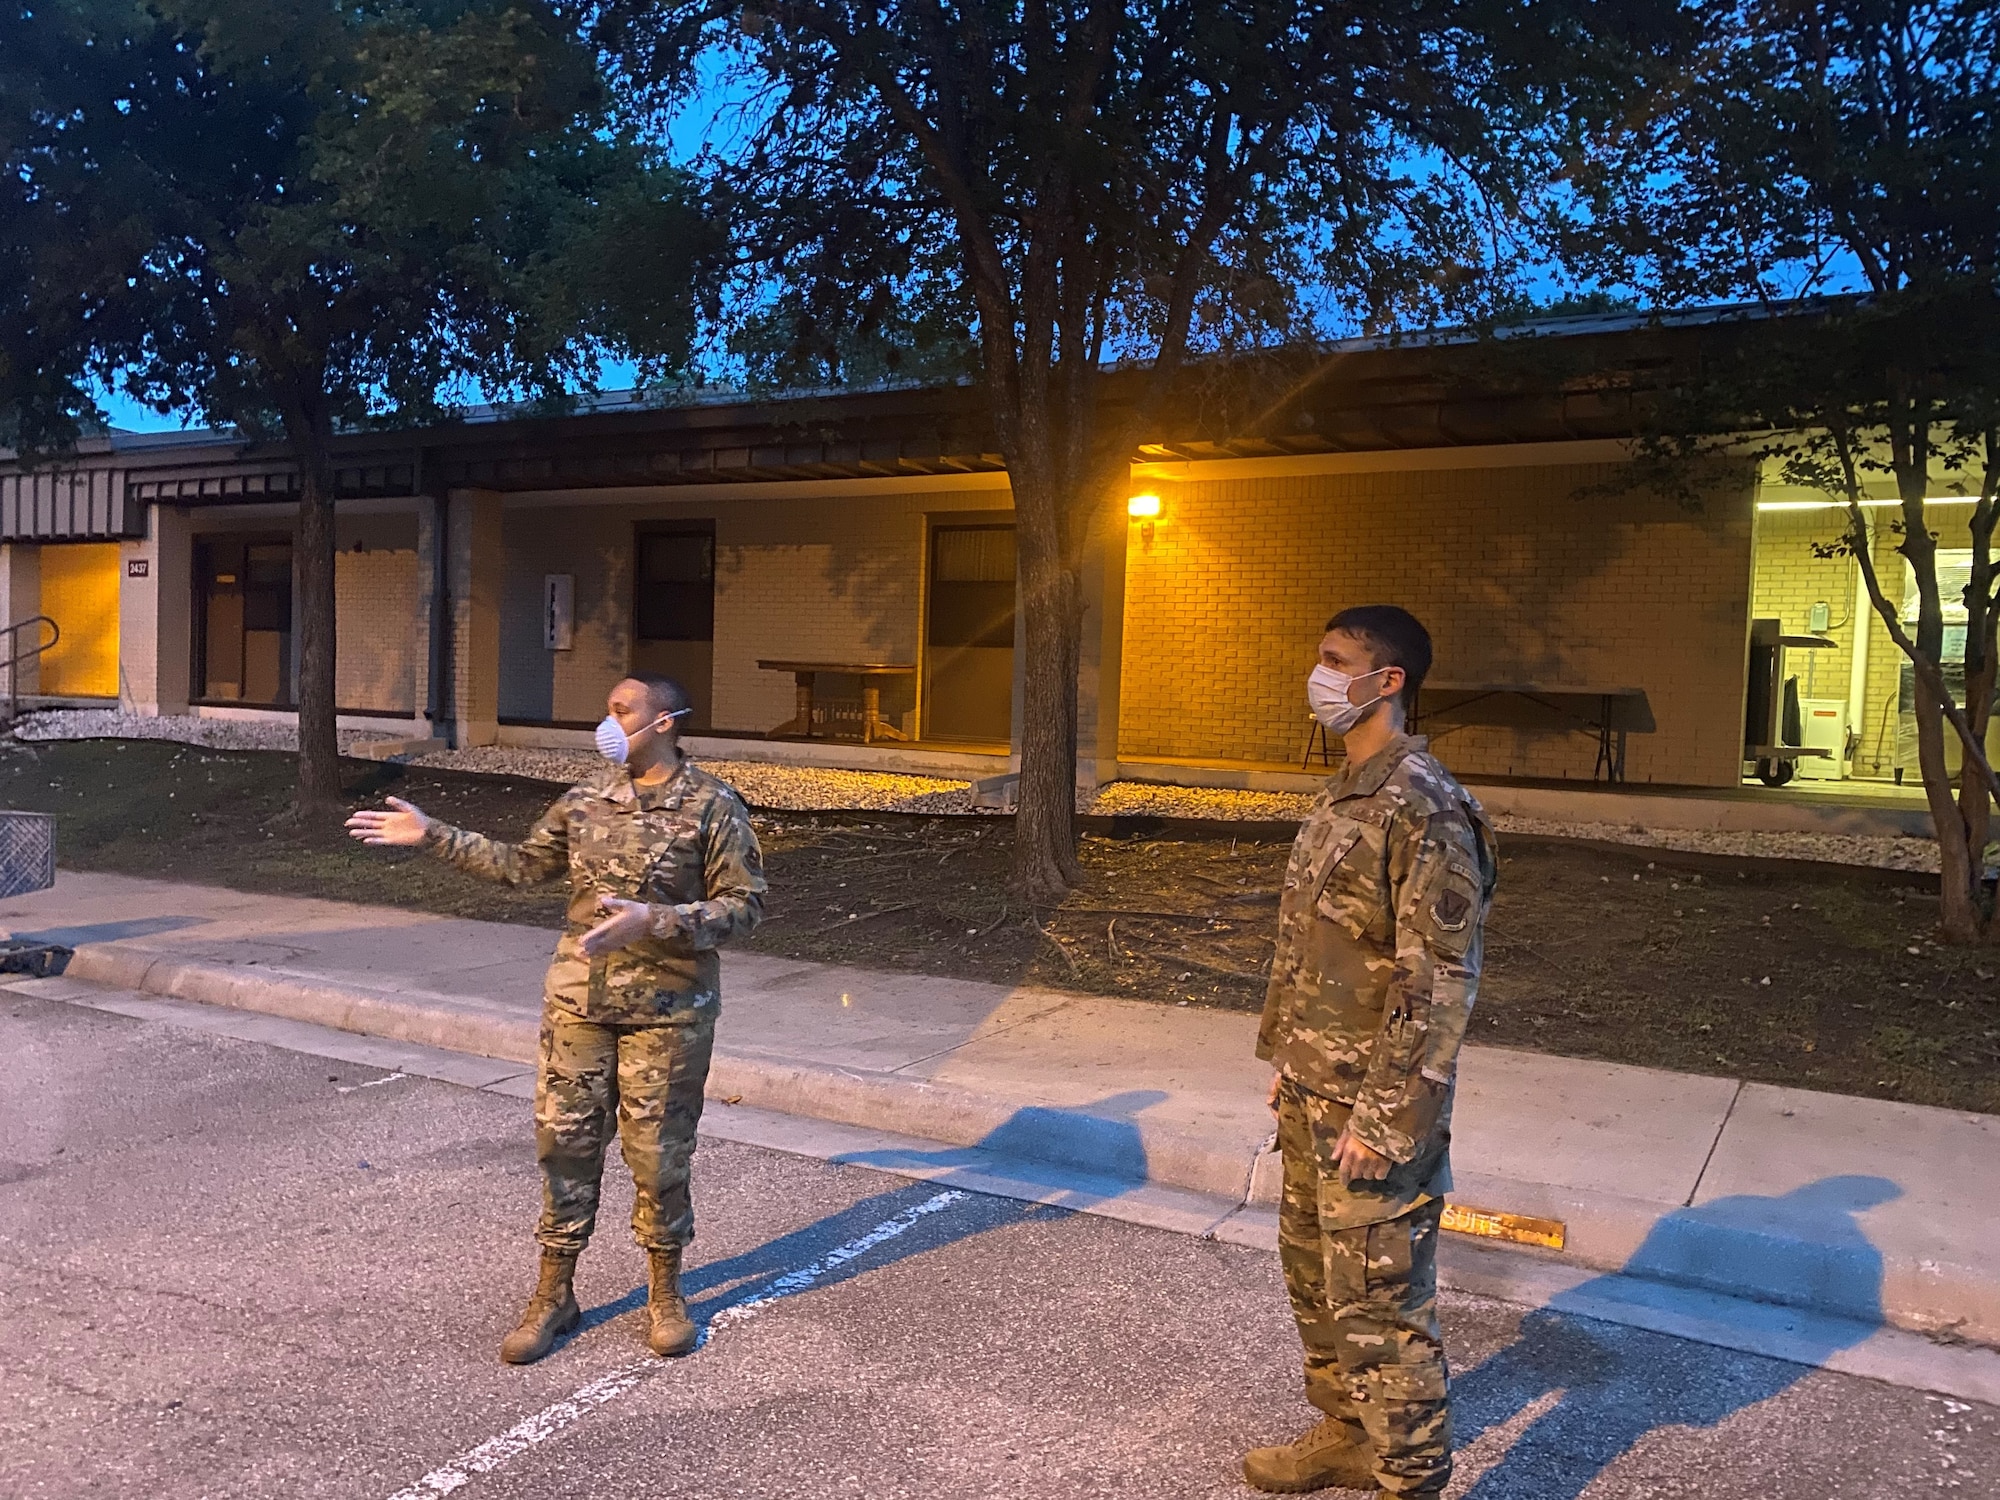 U.S. Air Force, Master Sgt. Stephanie Russ, 323rd Training Squadron, briefs volunteers for charge of quarters duty in support of Basic Military Training Airmen overnight Tuesday, April 7, 2020, Joint Base San Antonio – Lackland, Texas. CQ duties include intake, tracking and reporting, wellness checks, meal and personal item delivery, and arranging transport upon release.  (U.S. Air Force photo by Chief Master Sgt. Israel Jaeger)